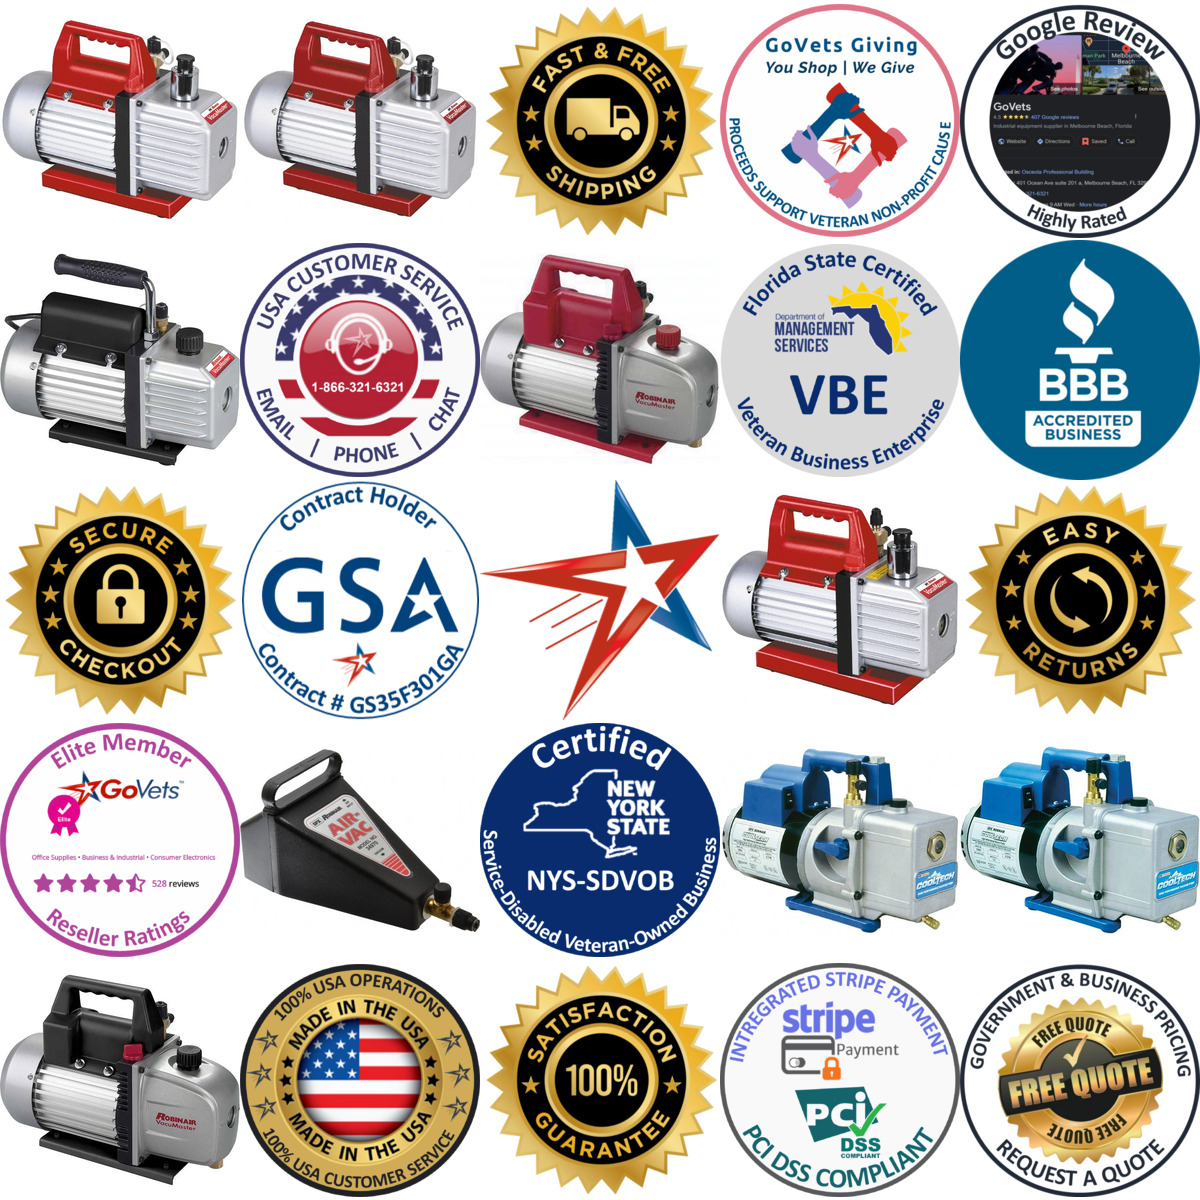 A selection of Automotive Vacuum Pumps products on GoVets